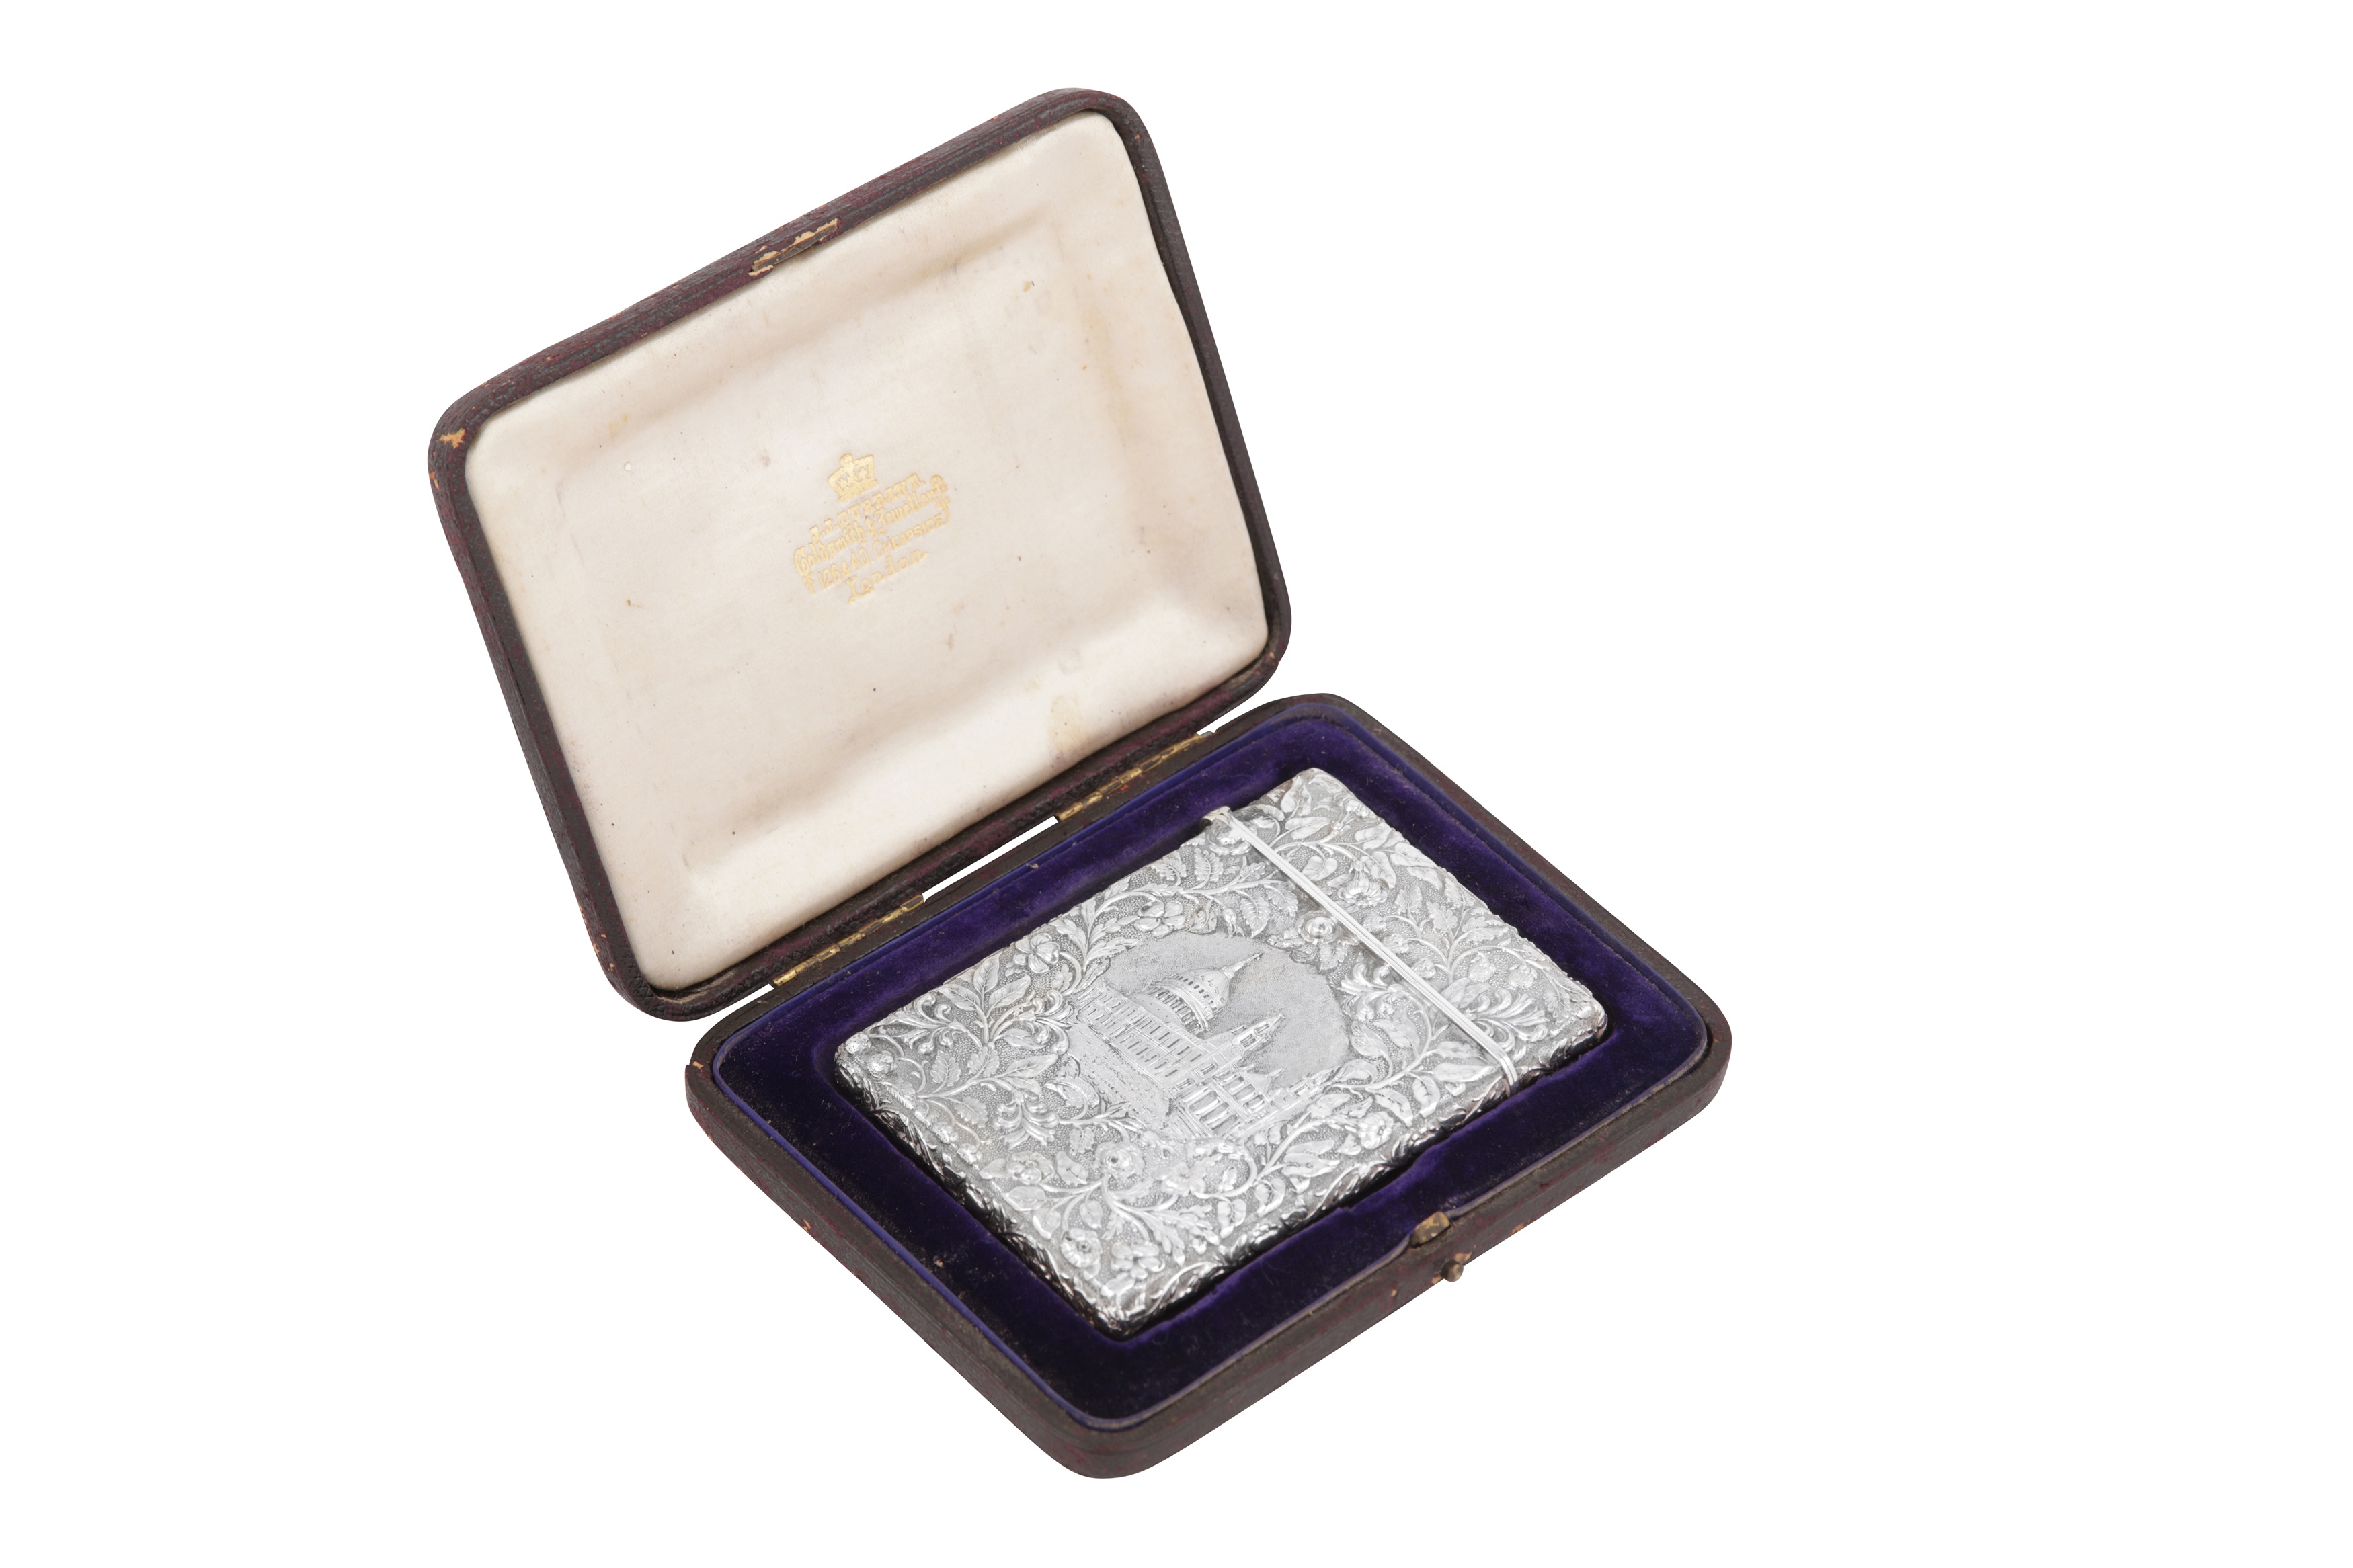 A cased Victorian sterling silver 'castle top' card case, Birmingham 1842 by Joseph Willmore